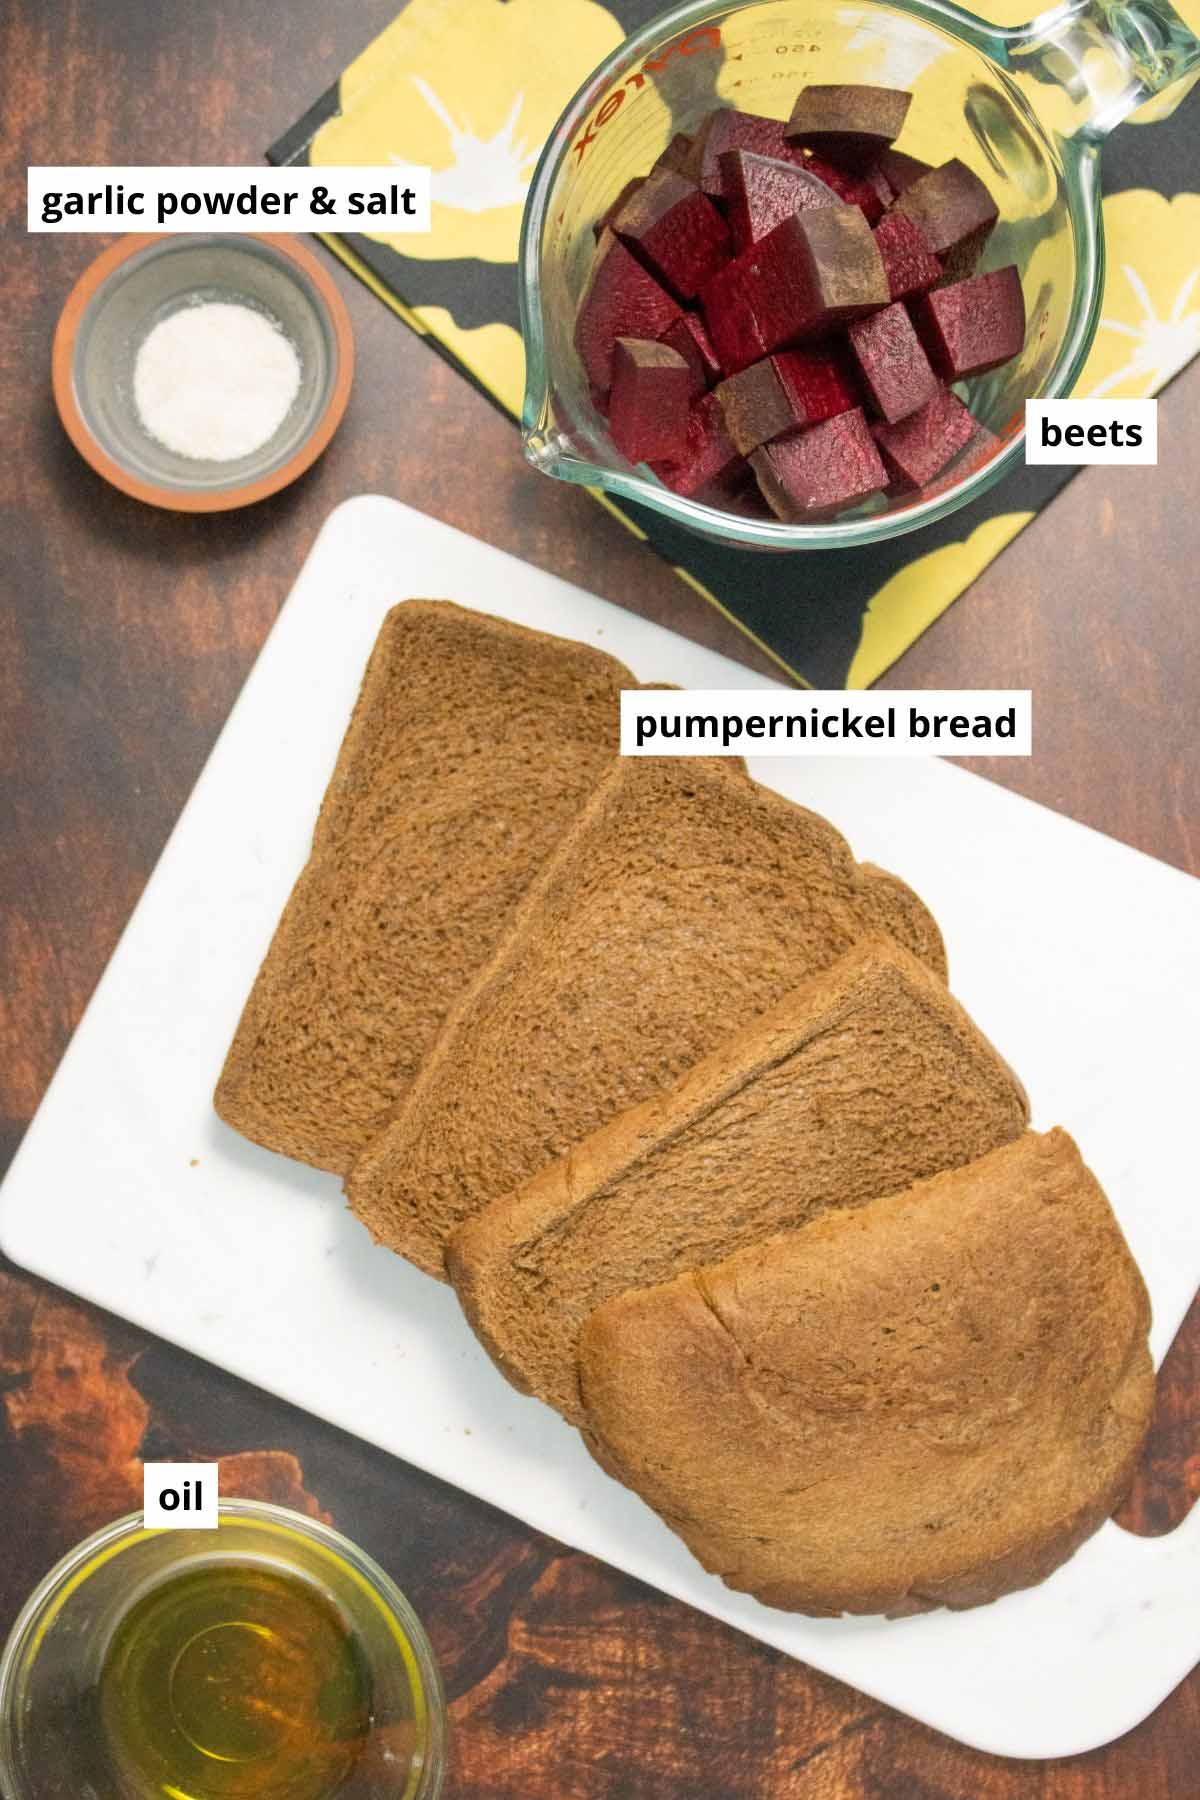 pumpernickel bread, beets, oil, and garlic salt on a wooden table